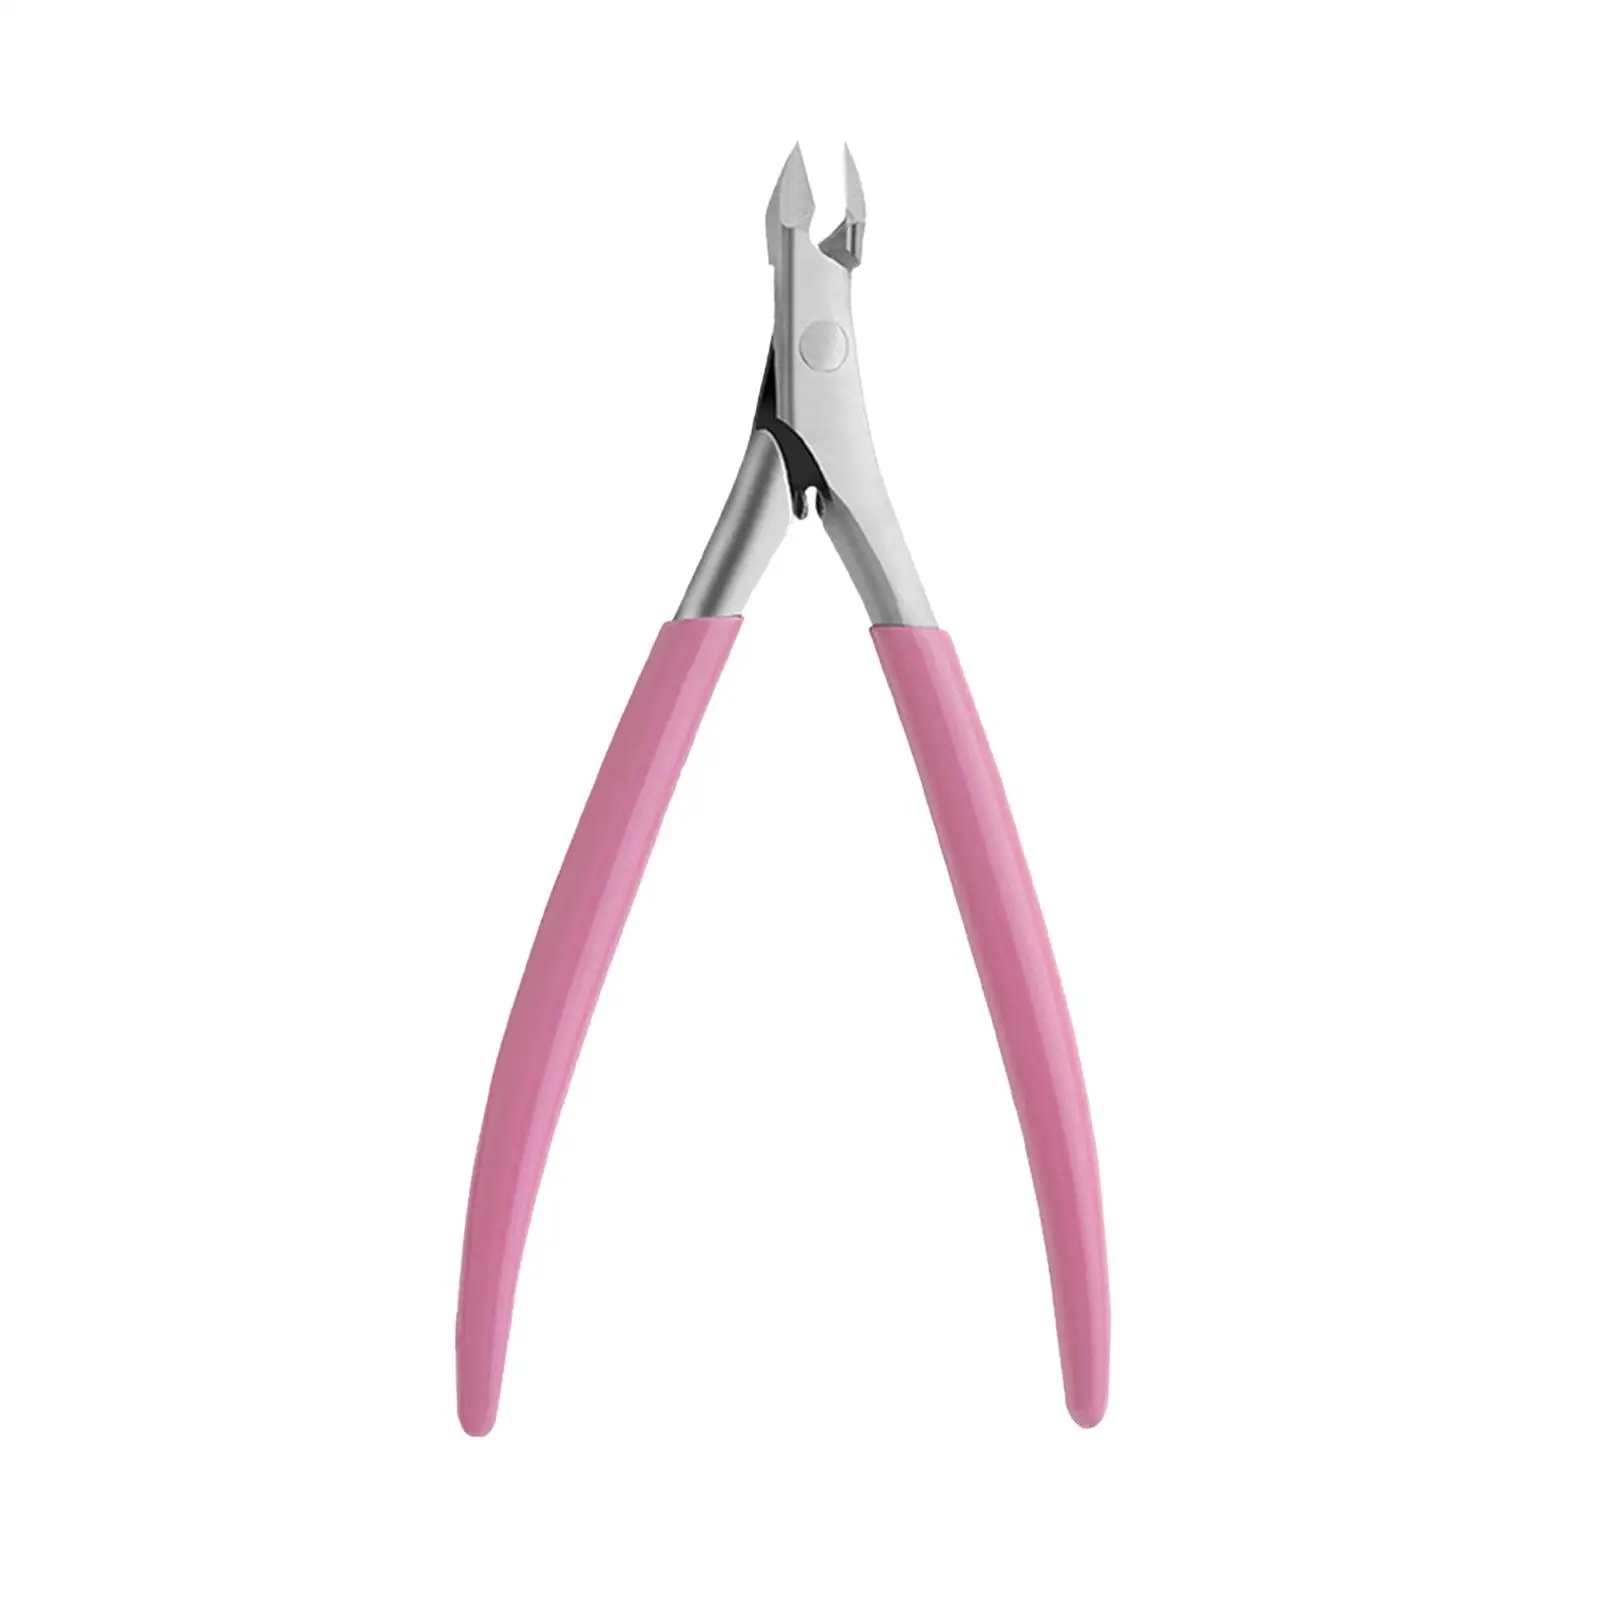 Professional Cuticle Trimmer Nippers Ingrown Toenail Clippers Pointed High Precision Callus Remover for Salon Home SPA